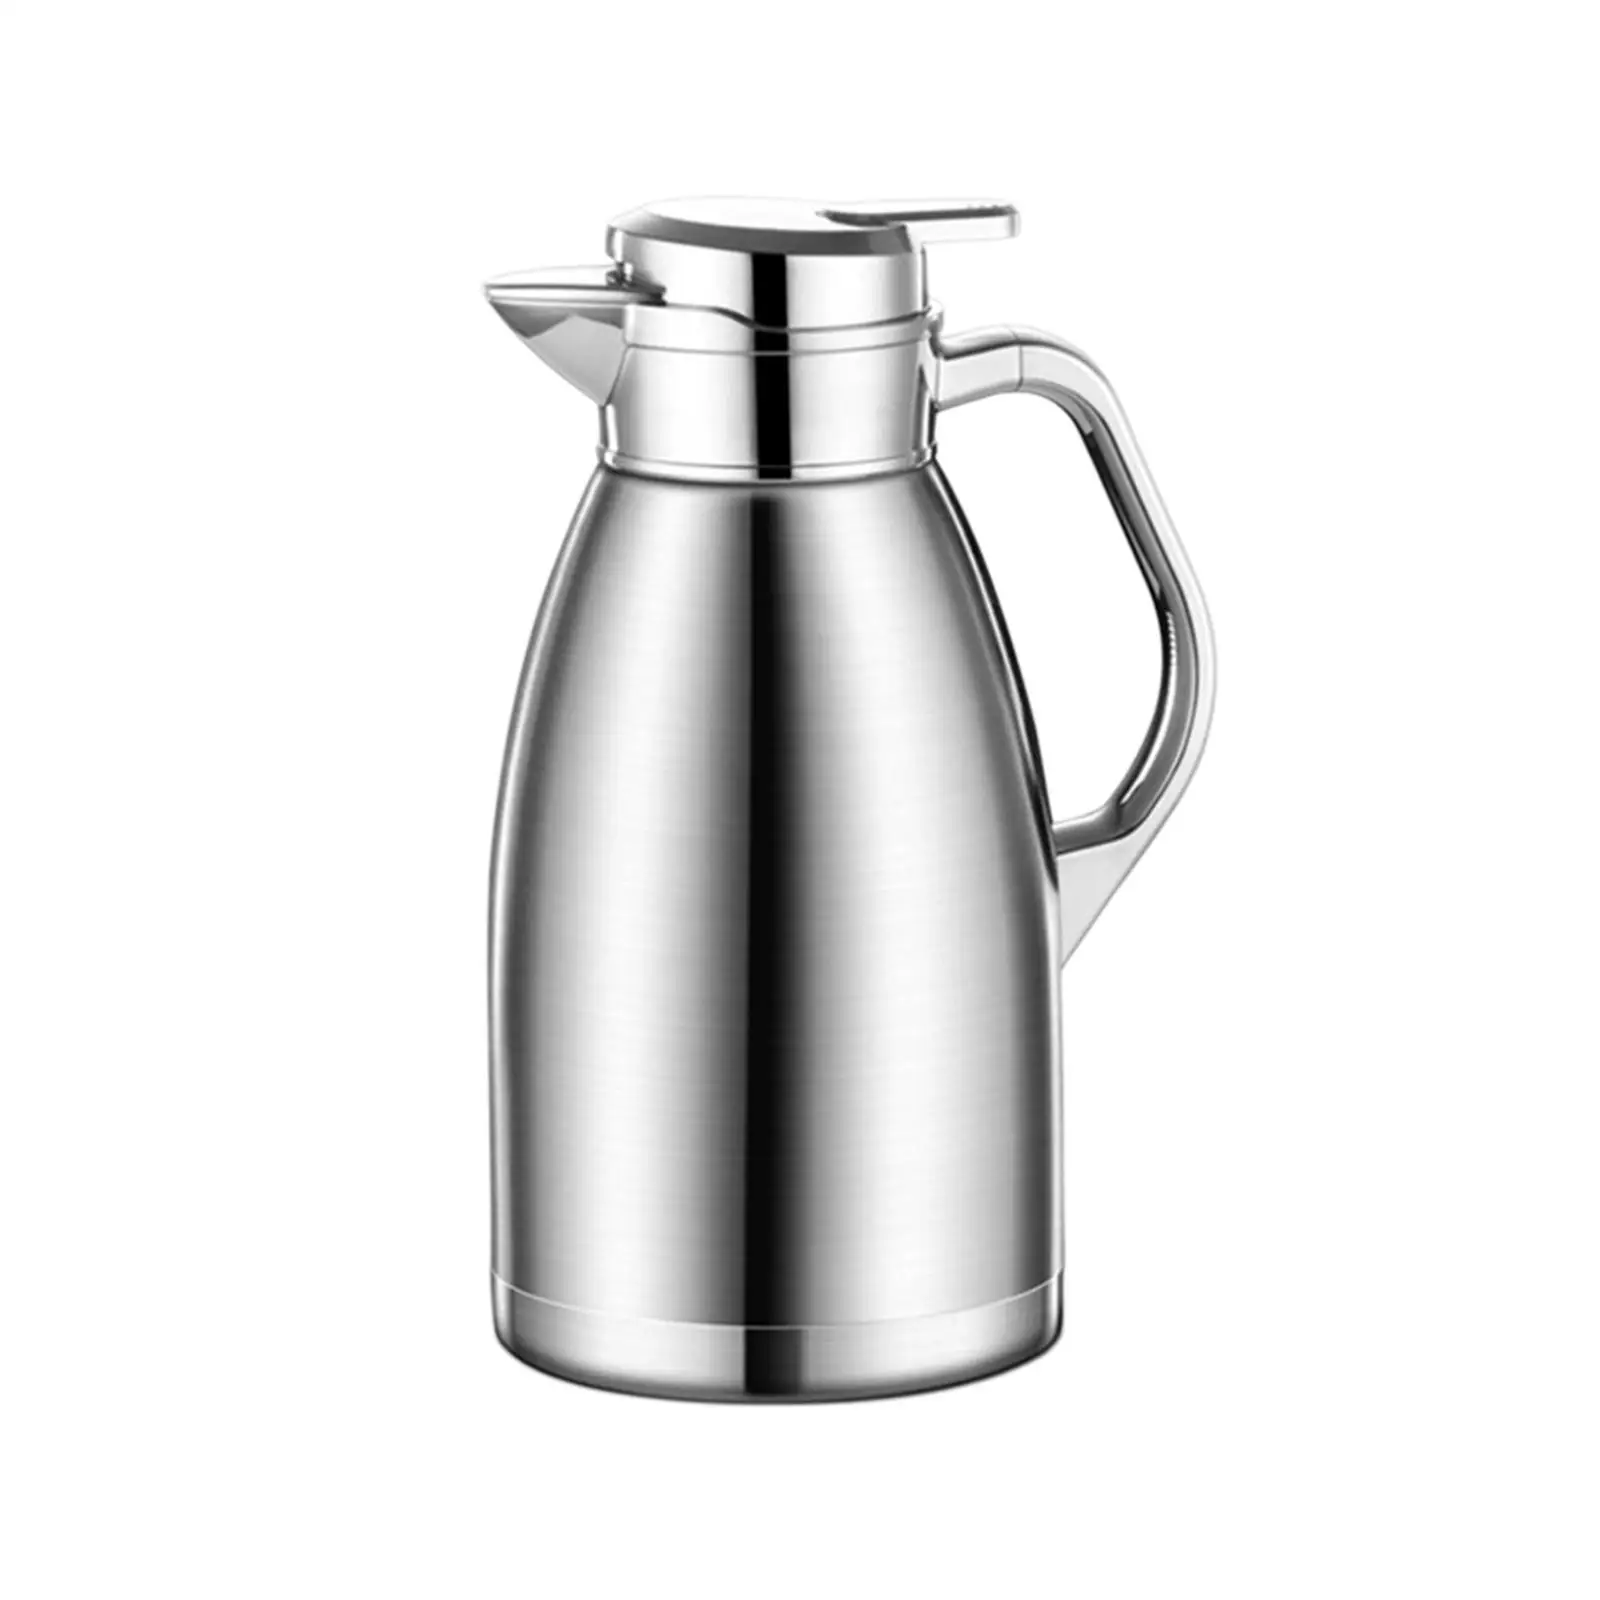 Thermal Insulated Carafes Kettle Large Capacity Thermal Beverage Dispenser Coffee Tea Pot for Cafe Office Kitchen Water